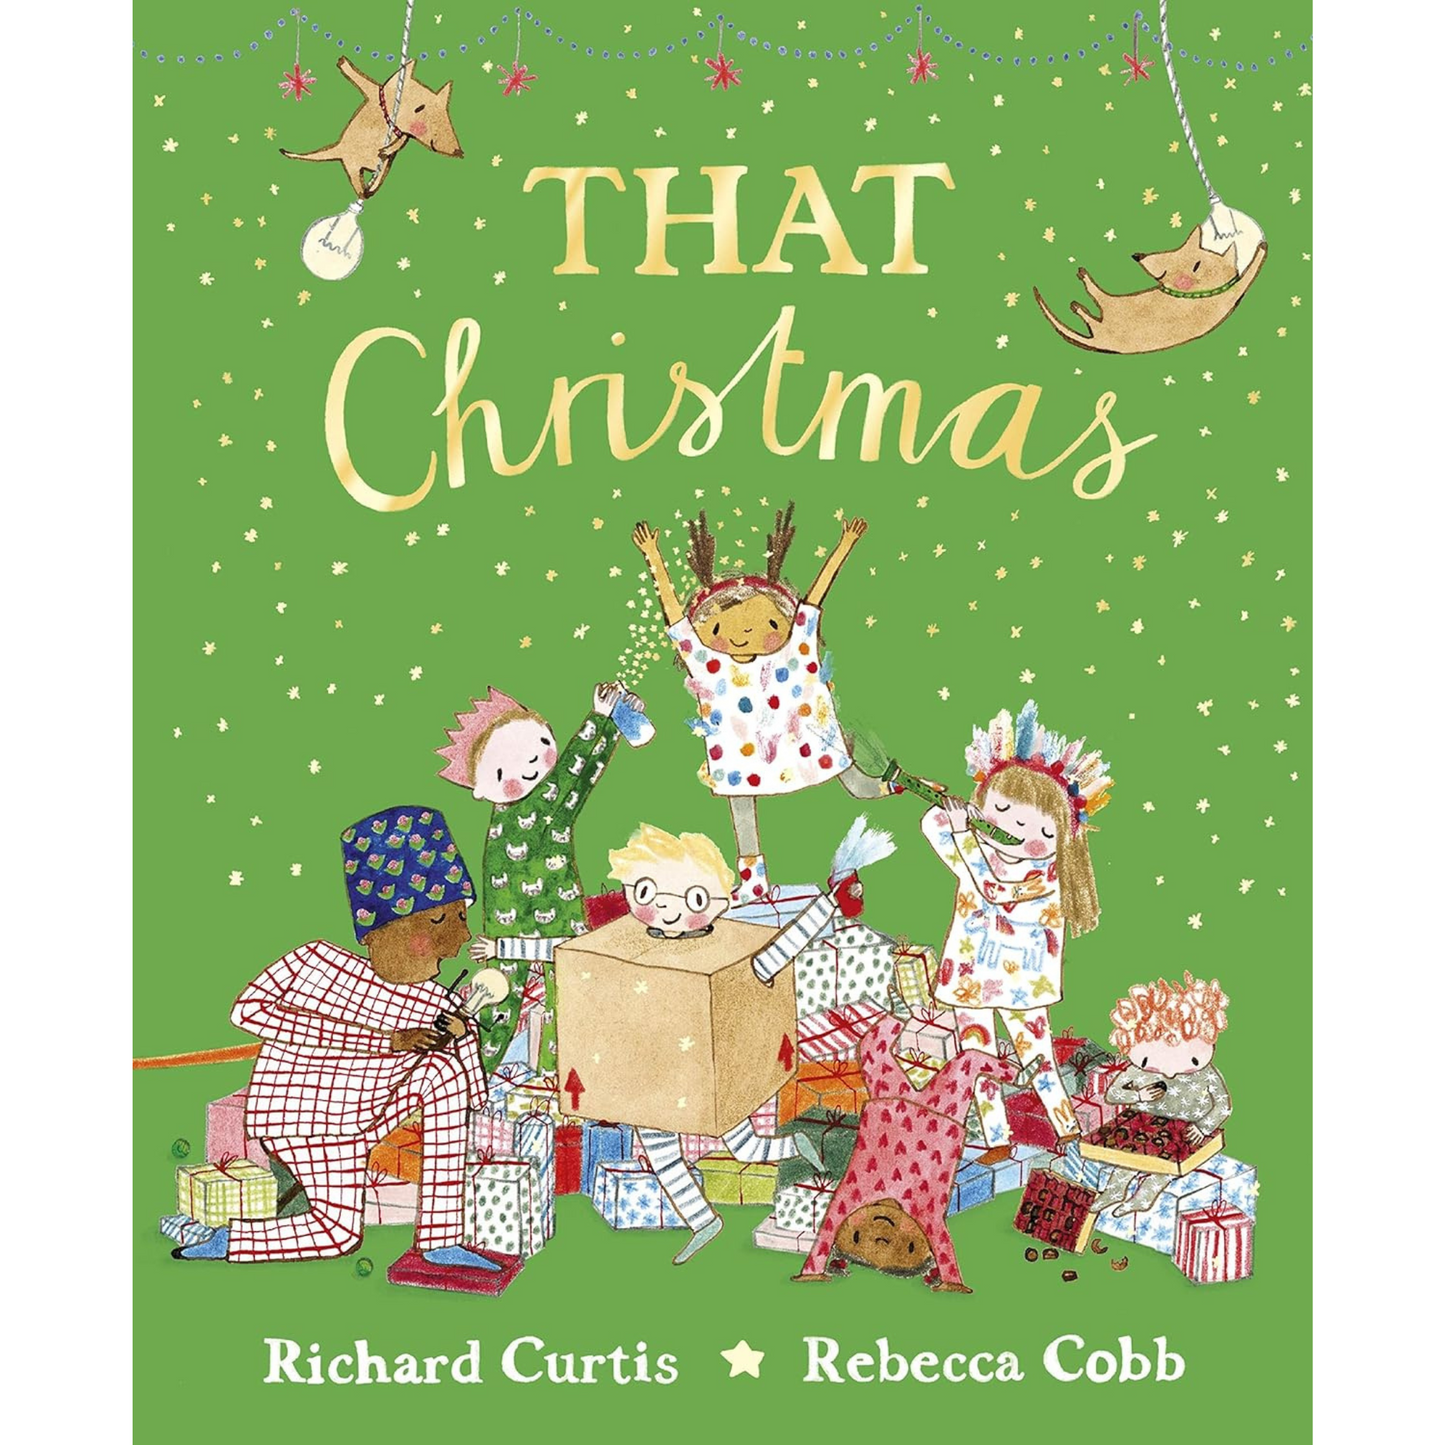 That Christmas by Richard Curtis